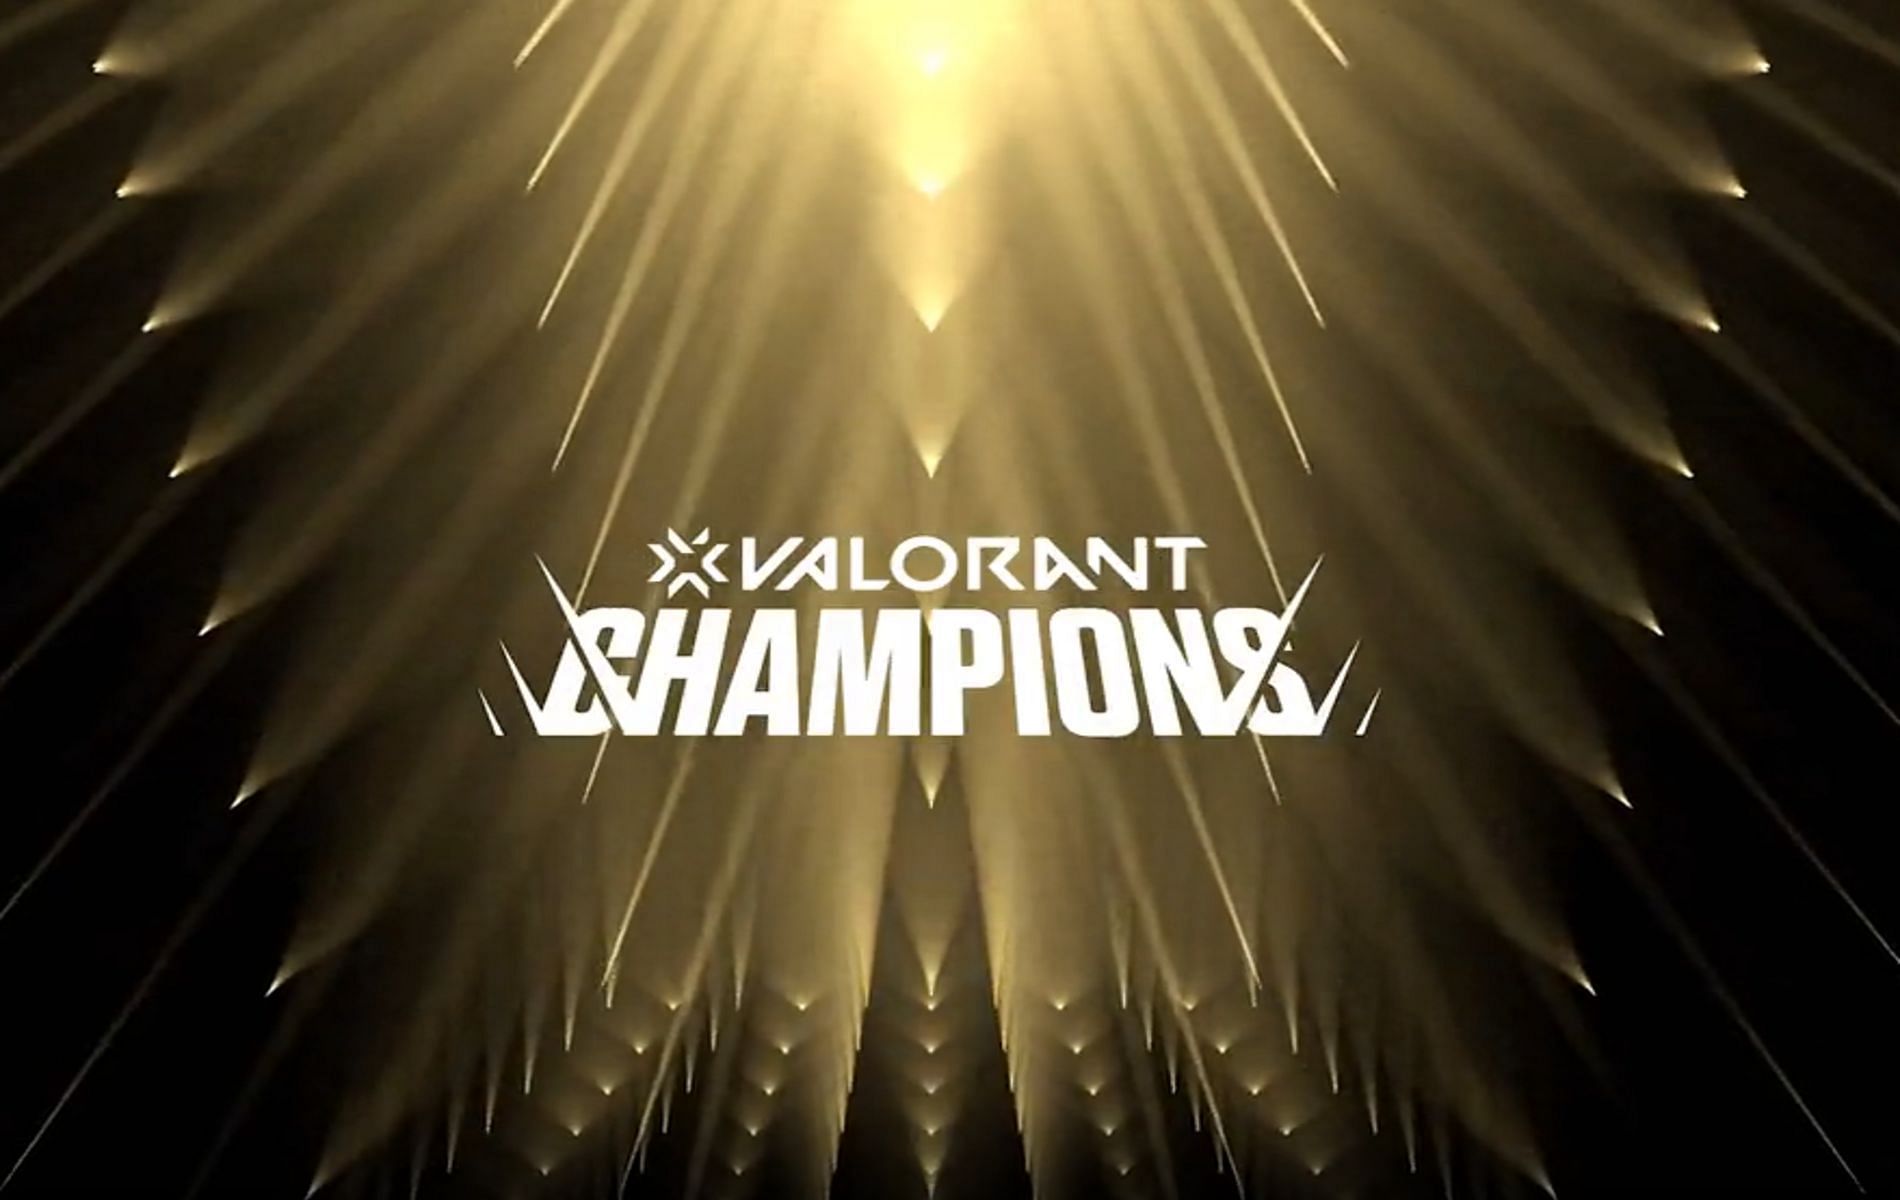 Valorant&#039;s upcoming home screen features a theme related to Champions 2022. (Image via Twitter/@floxayyy)